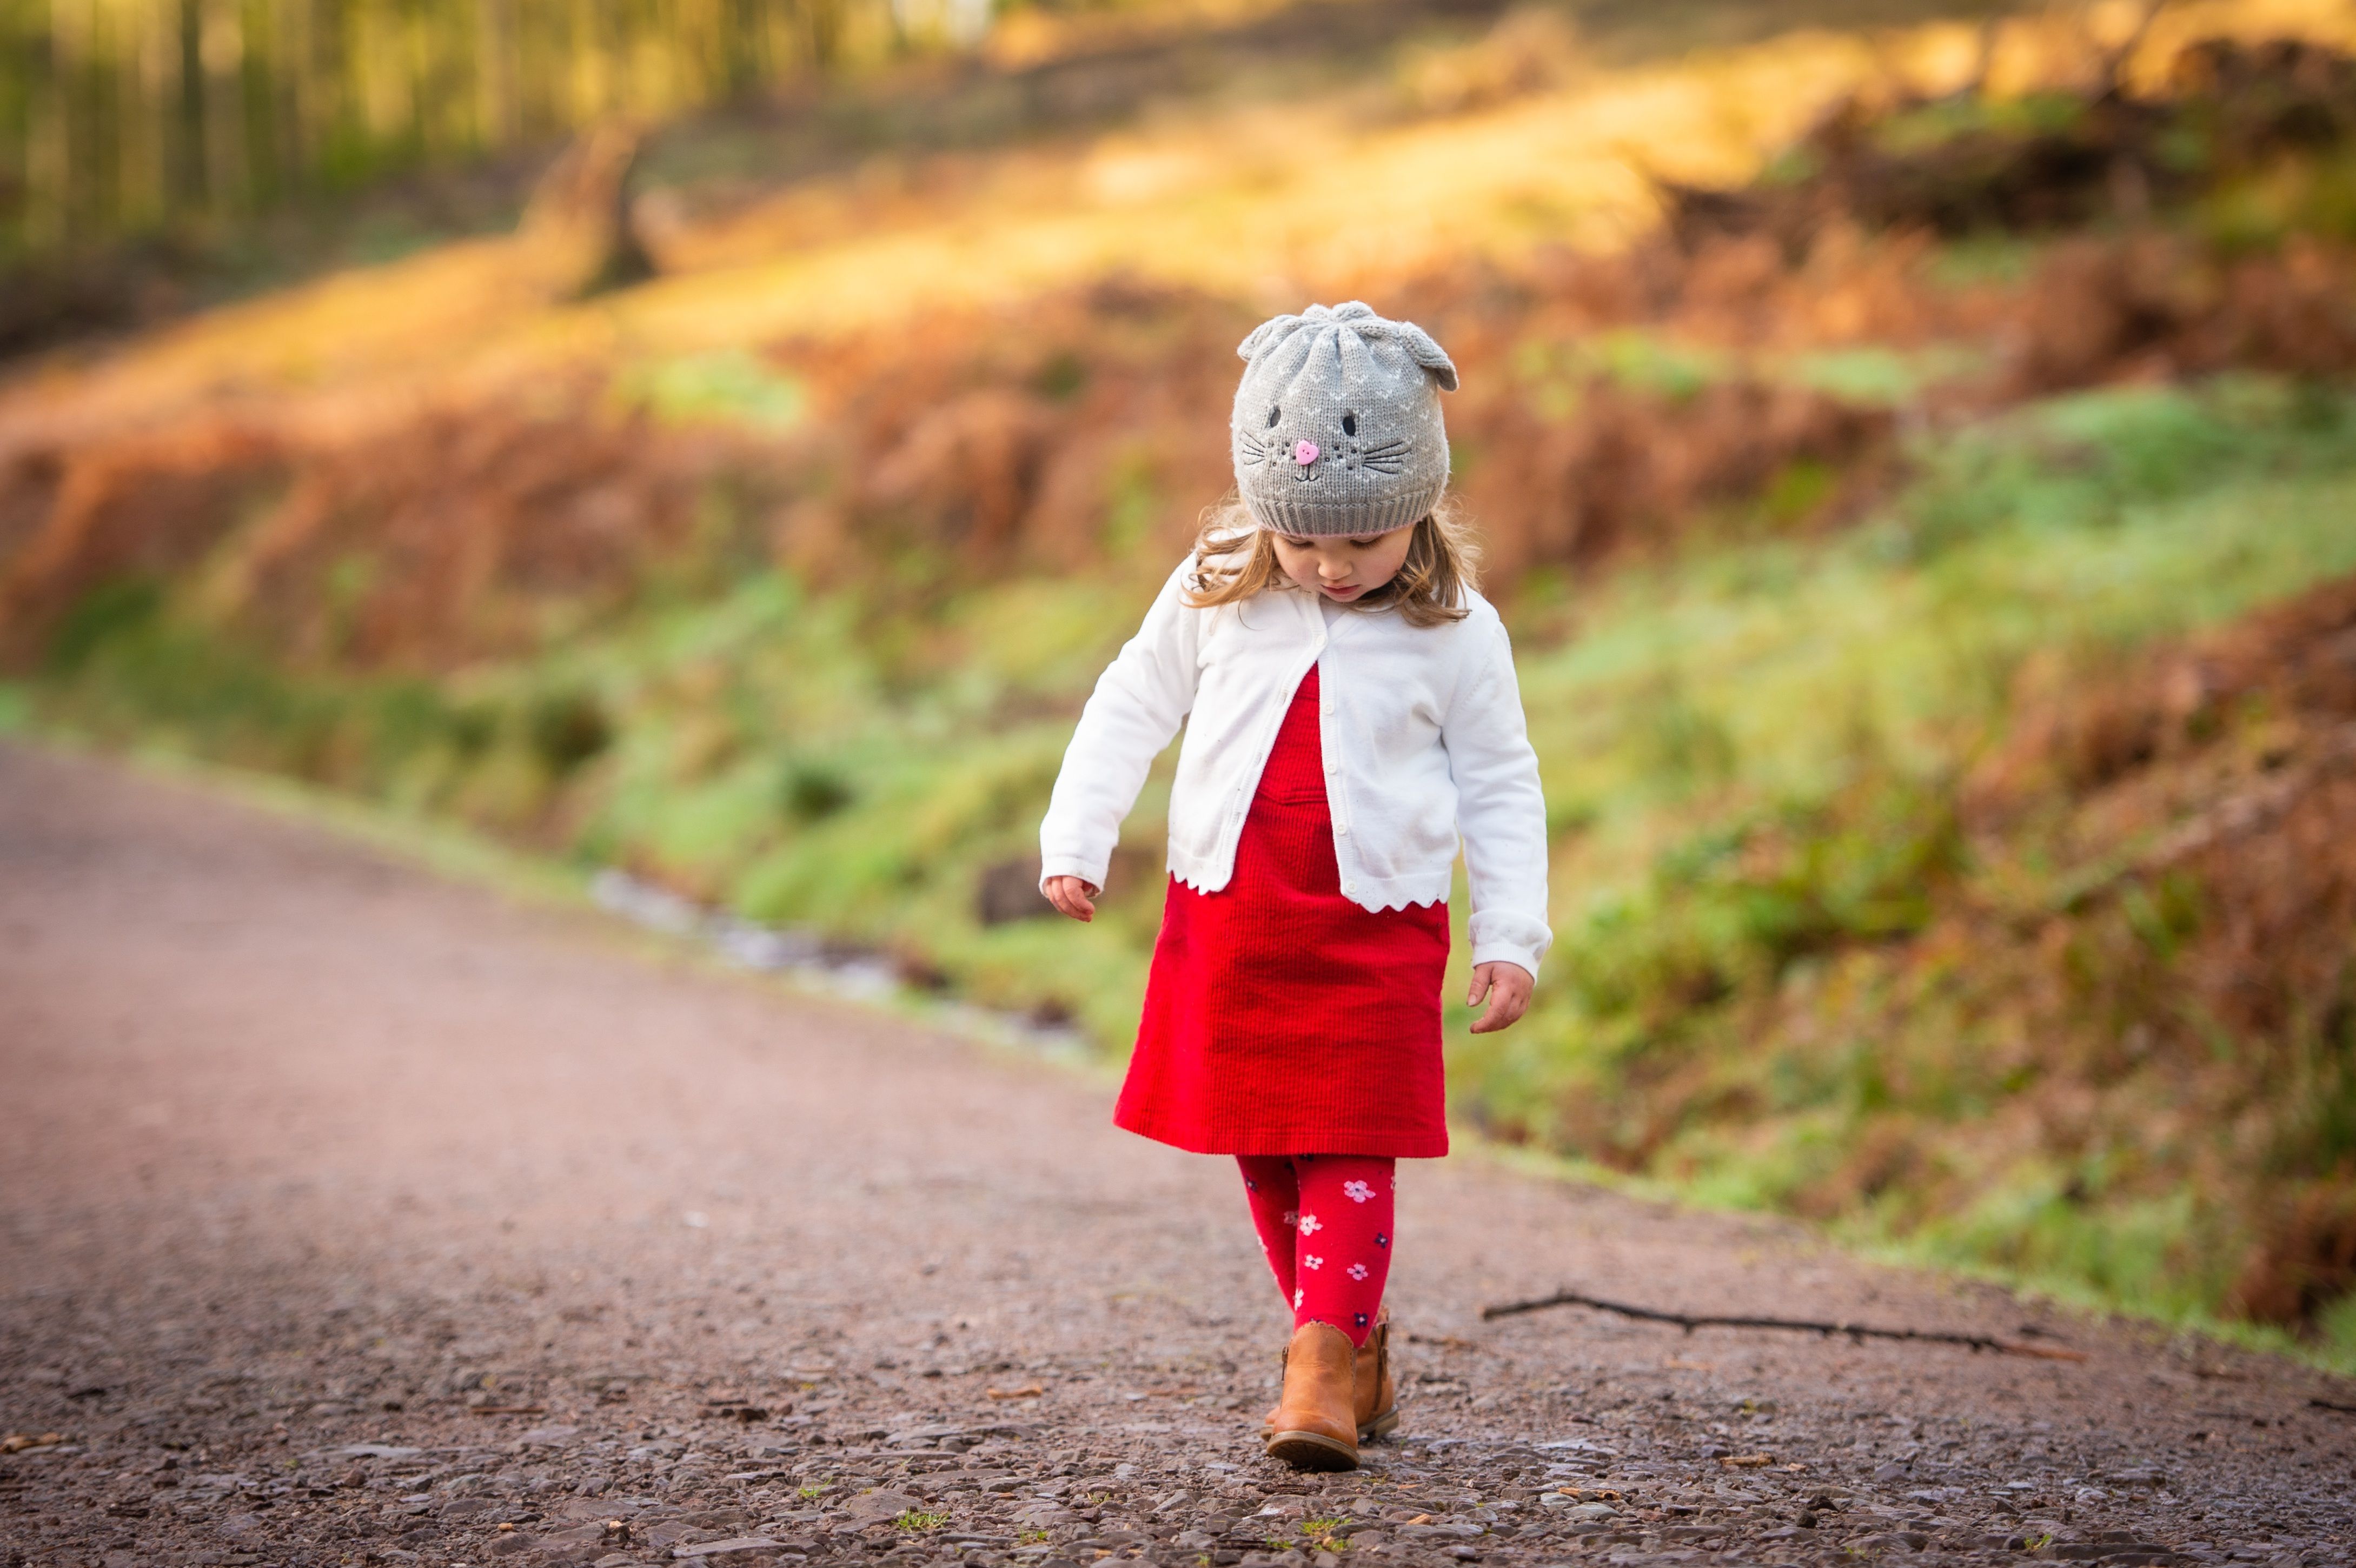 Cute Girl Wallpaper 4K, Child, Adorable, Road, Red dress, Winter, Cold, Cute